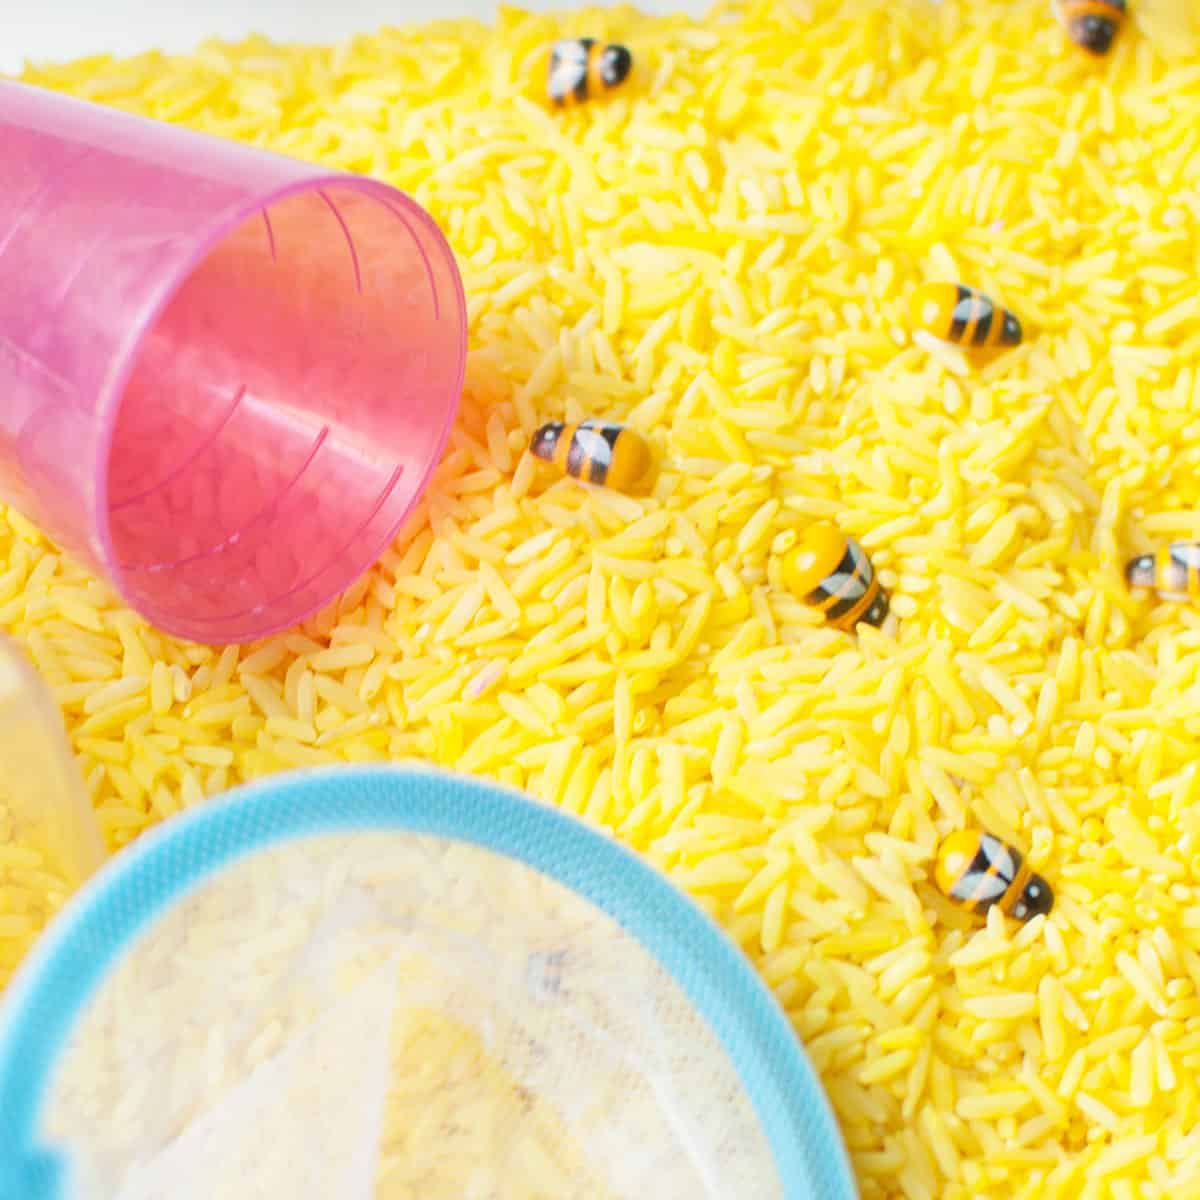 A bee sensory bin. It is a sensory bin made from rice that has been dyed yellow, small bee toys, scoops, and a bug catching kit.